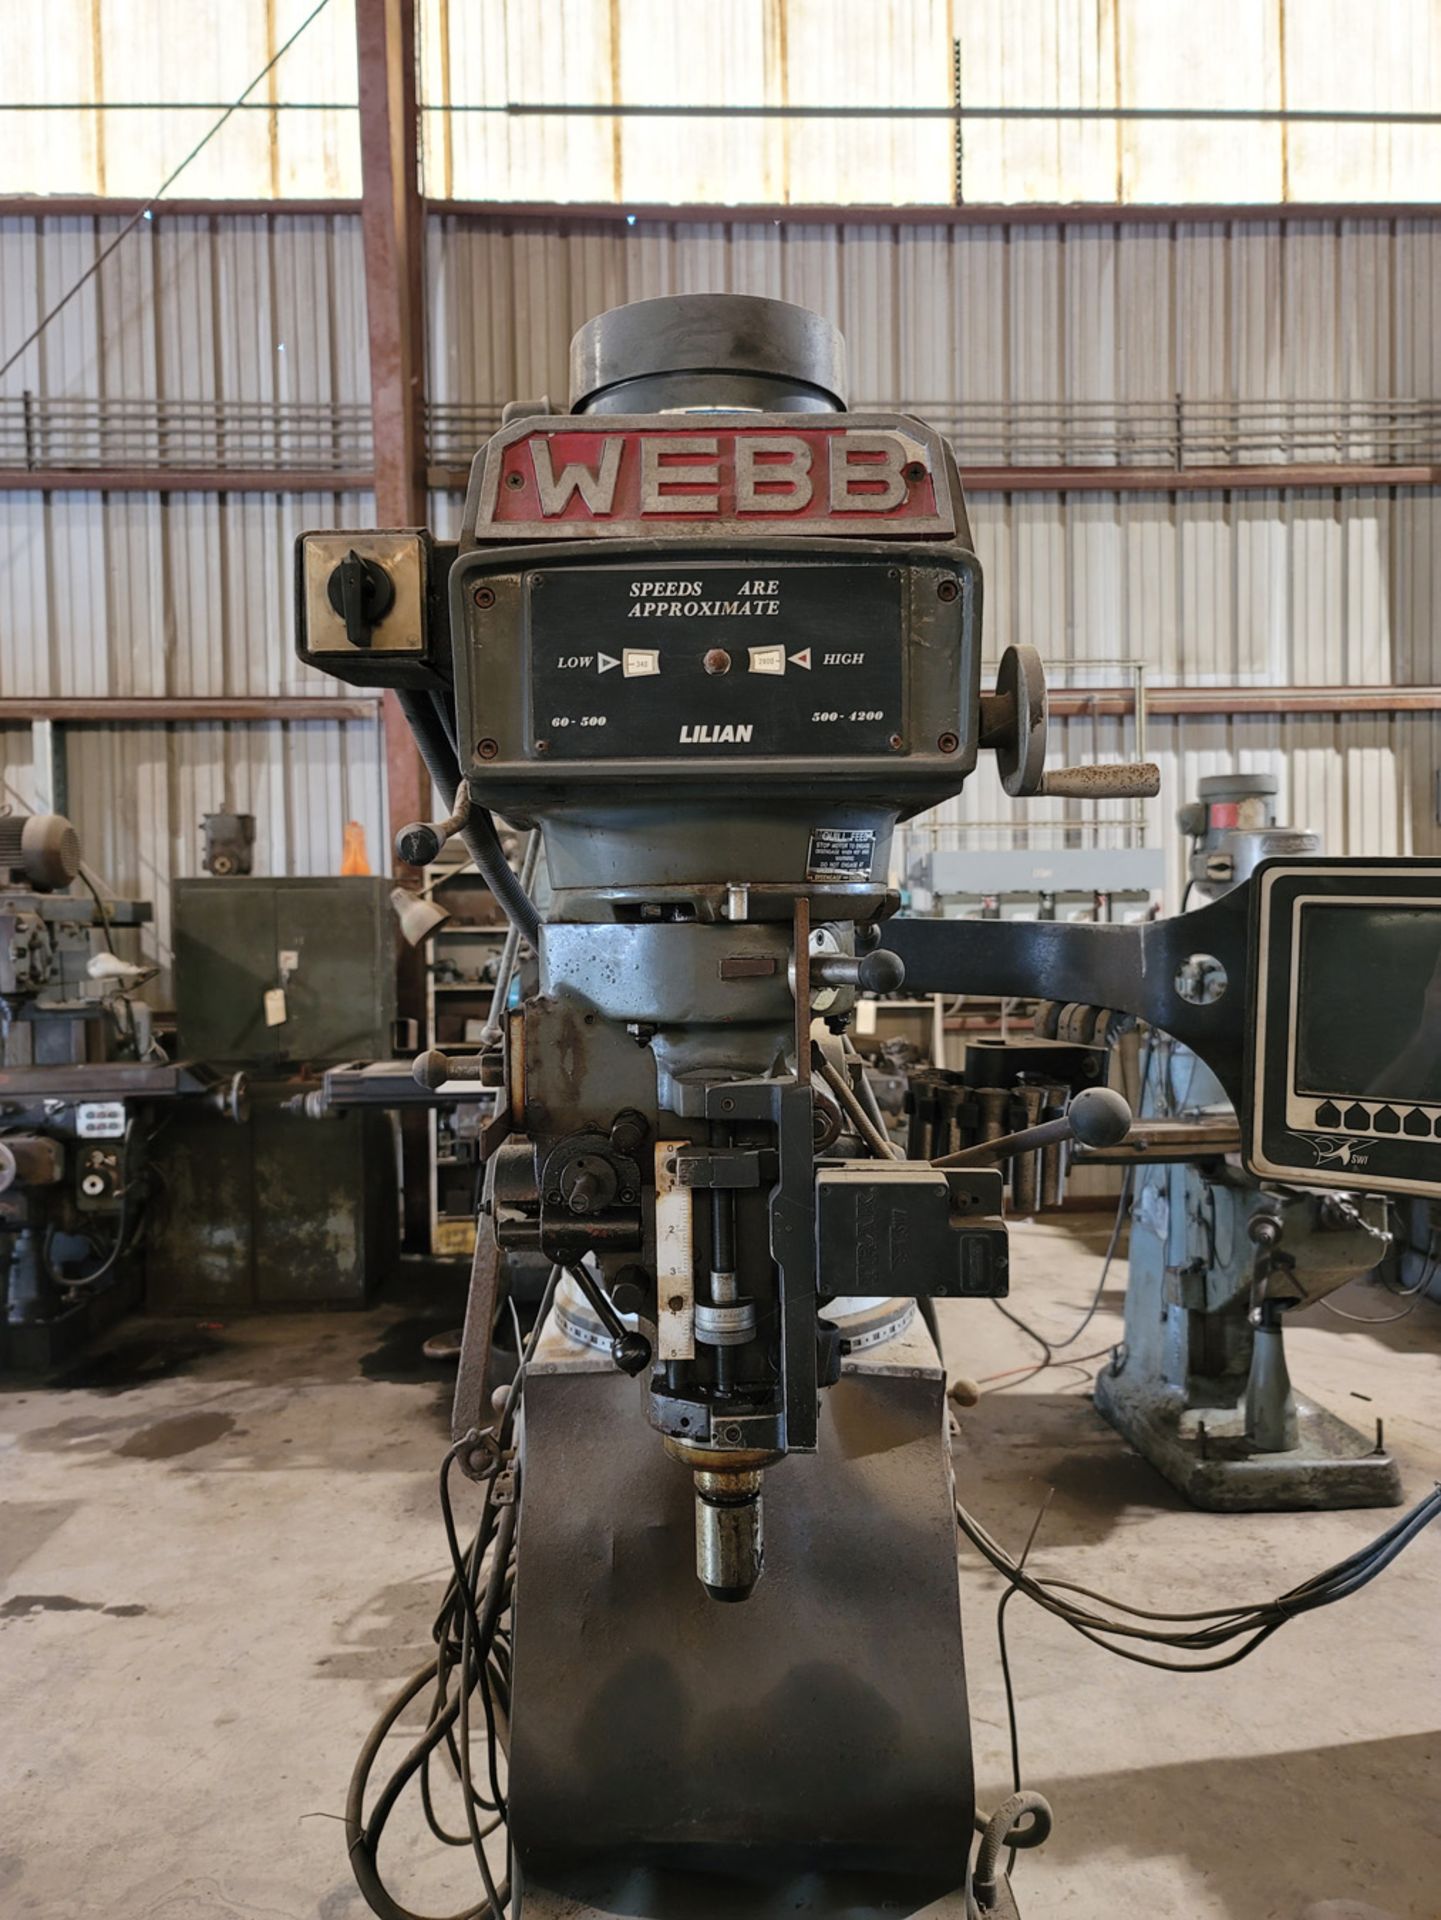 Webb 4VH Vertical Milling Machine with Proto Trak MX2 DRO - Image 4 of 11